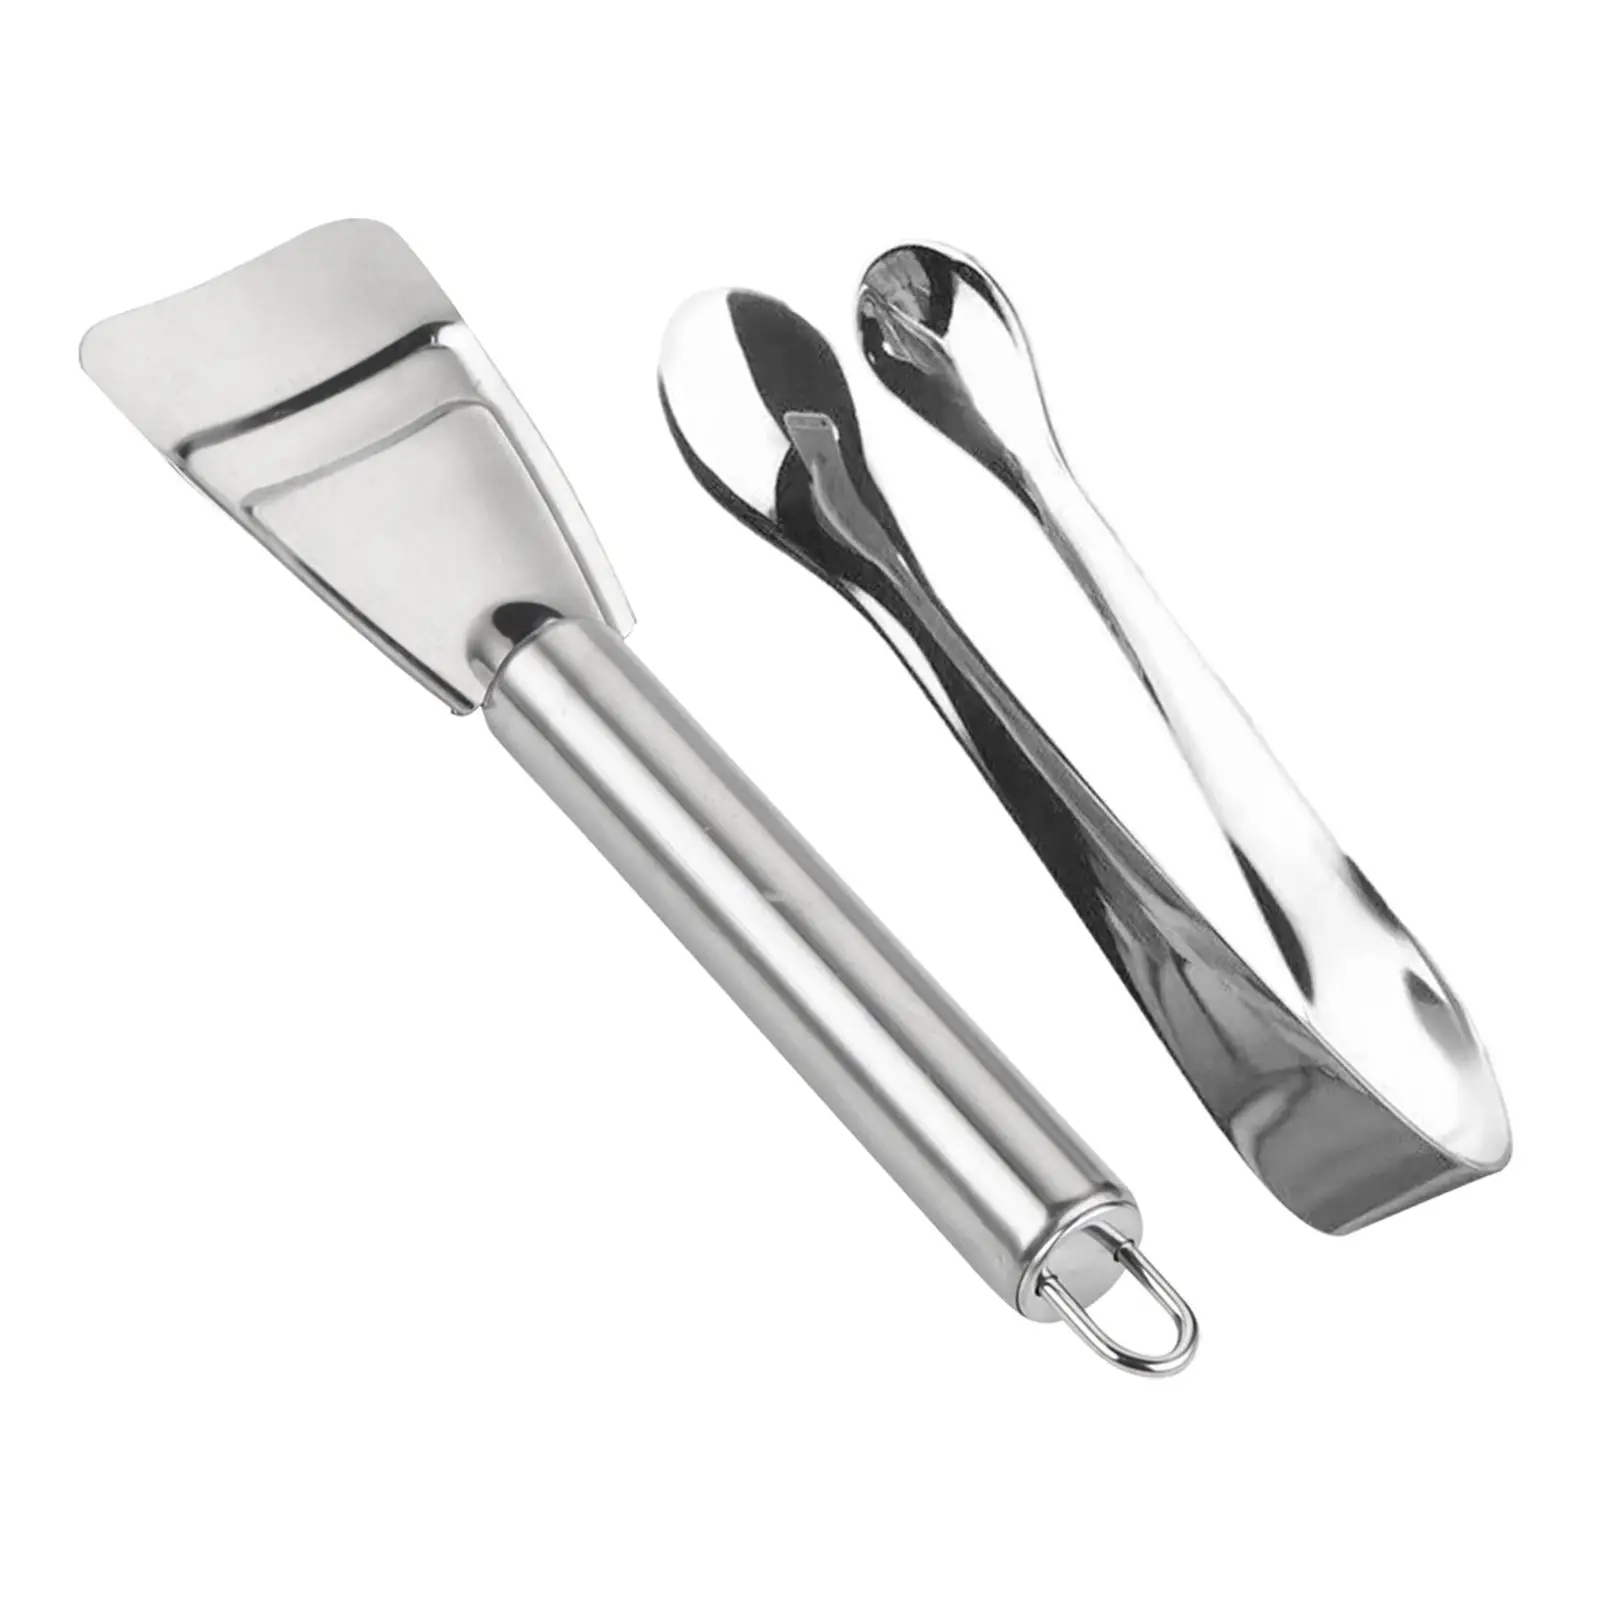 Ice Scooper and Ice Tongs Set Candy Spade Versatile Kitchen Scooper and Tongs Kitchen Serving Tongs Set for Buffet Restaurant